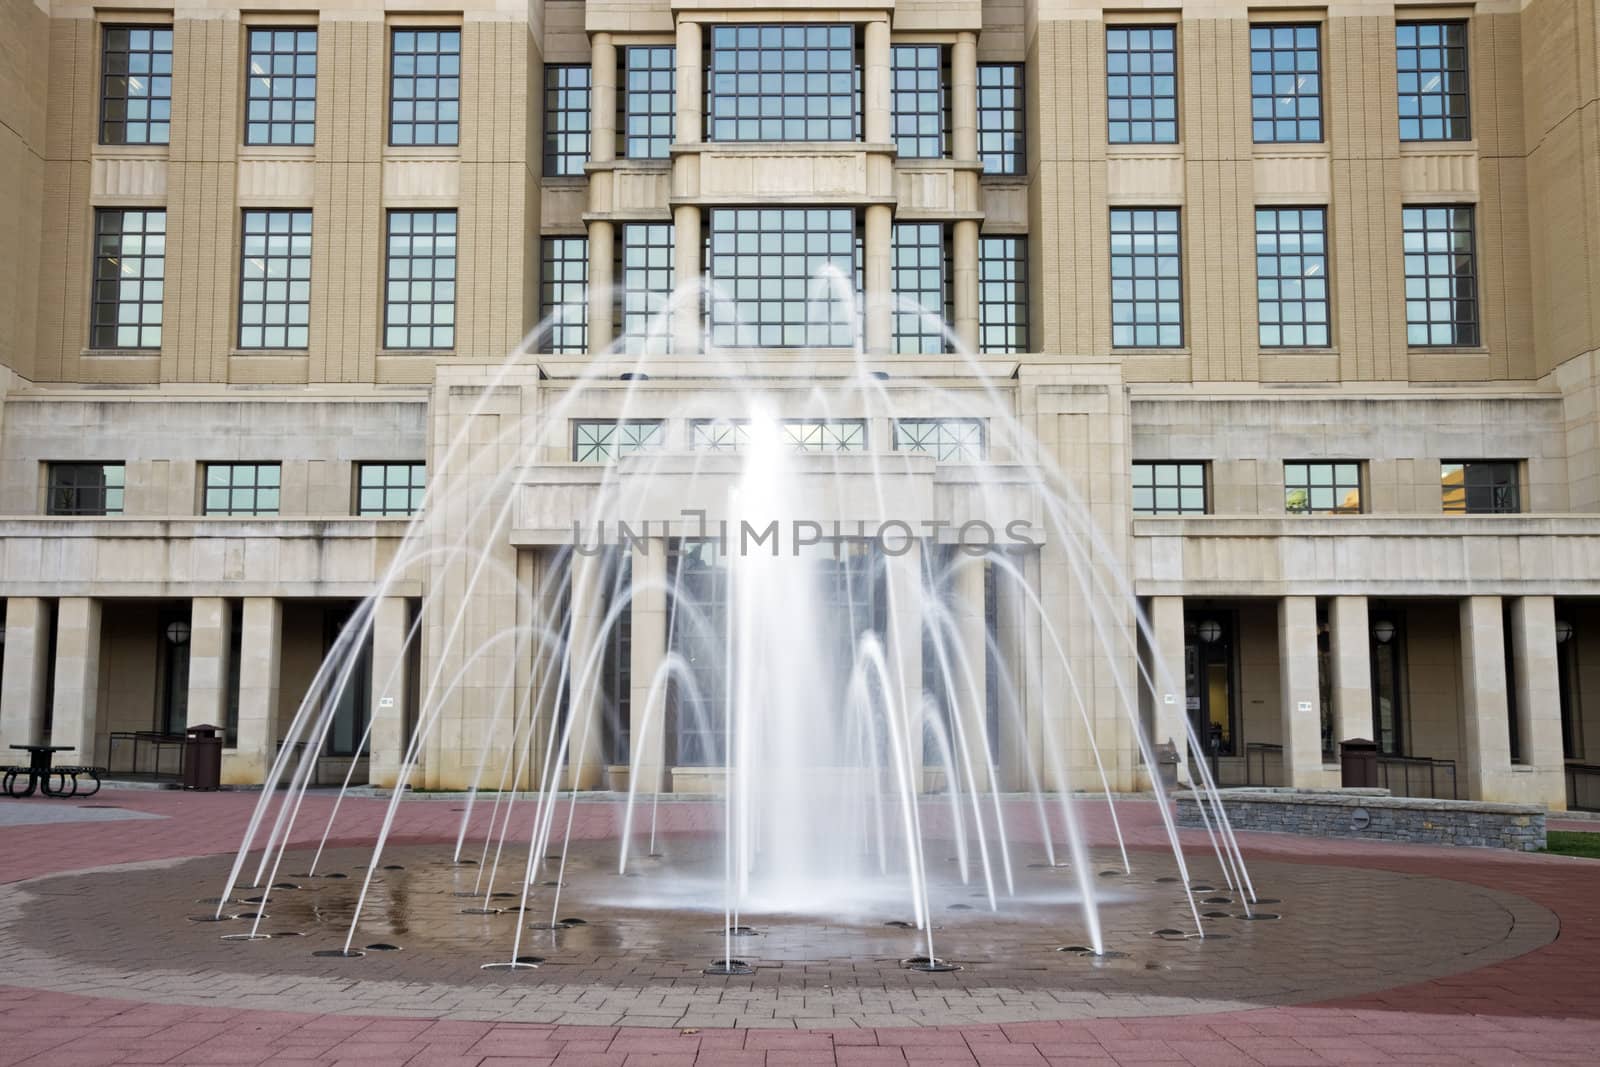 Fountain in front of courthouse in Lexington by benkrut